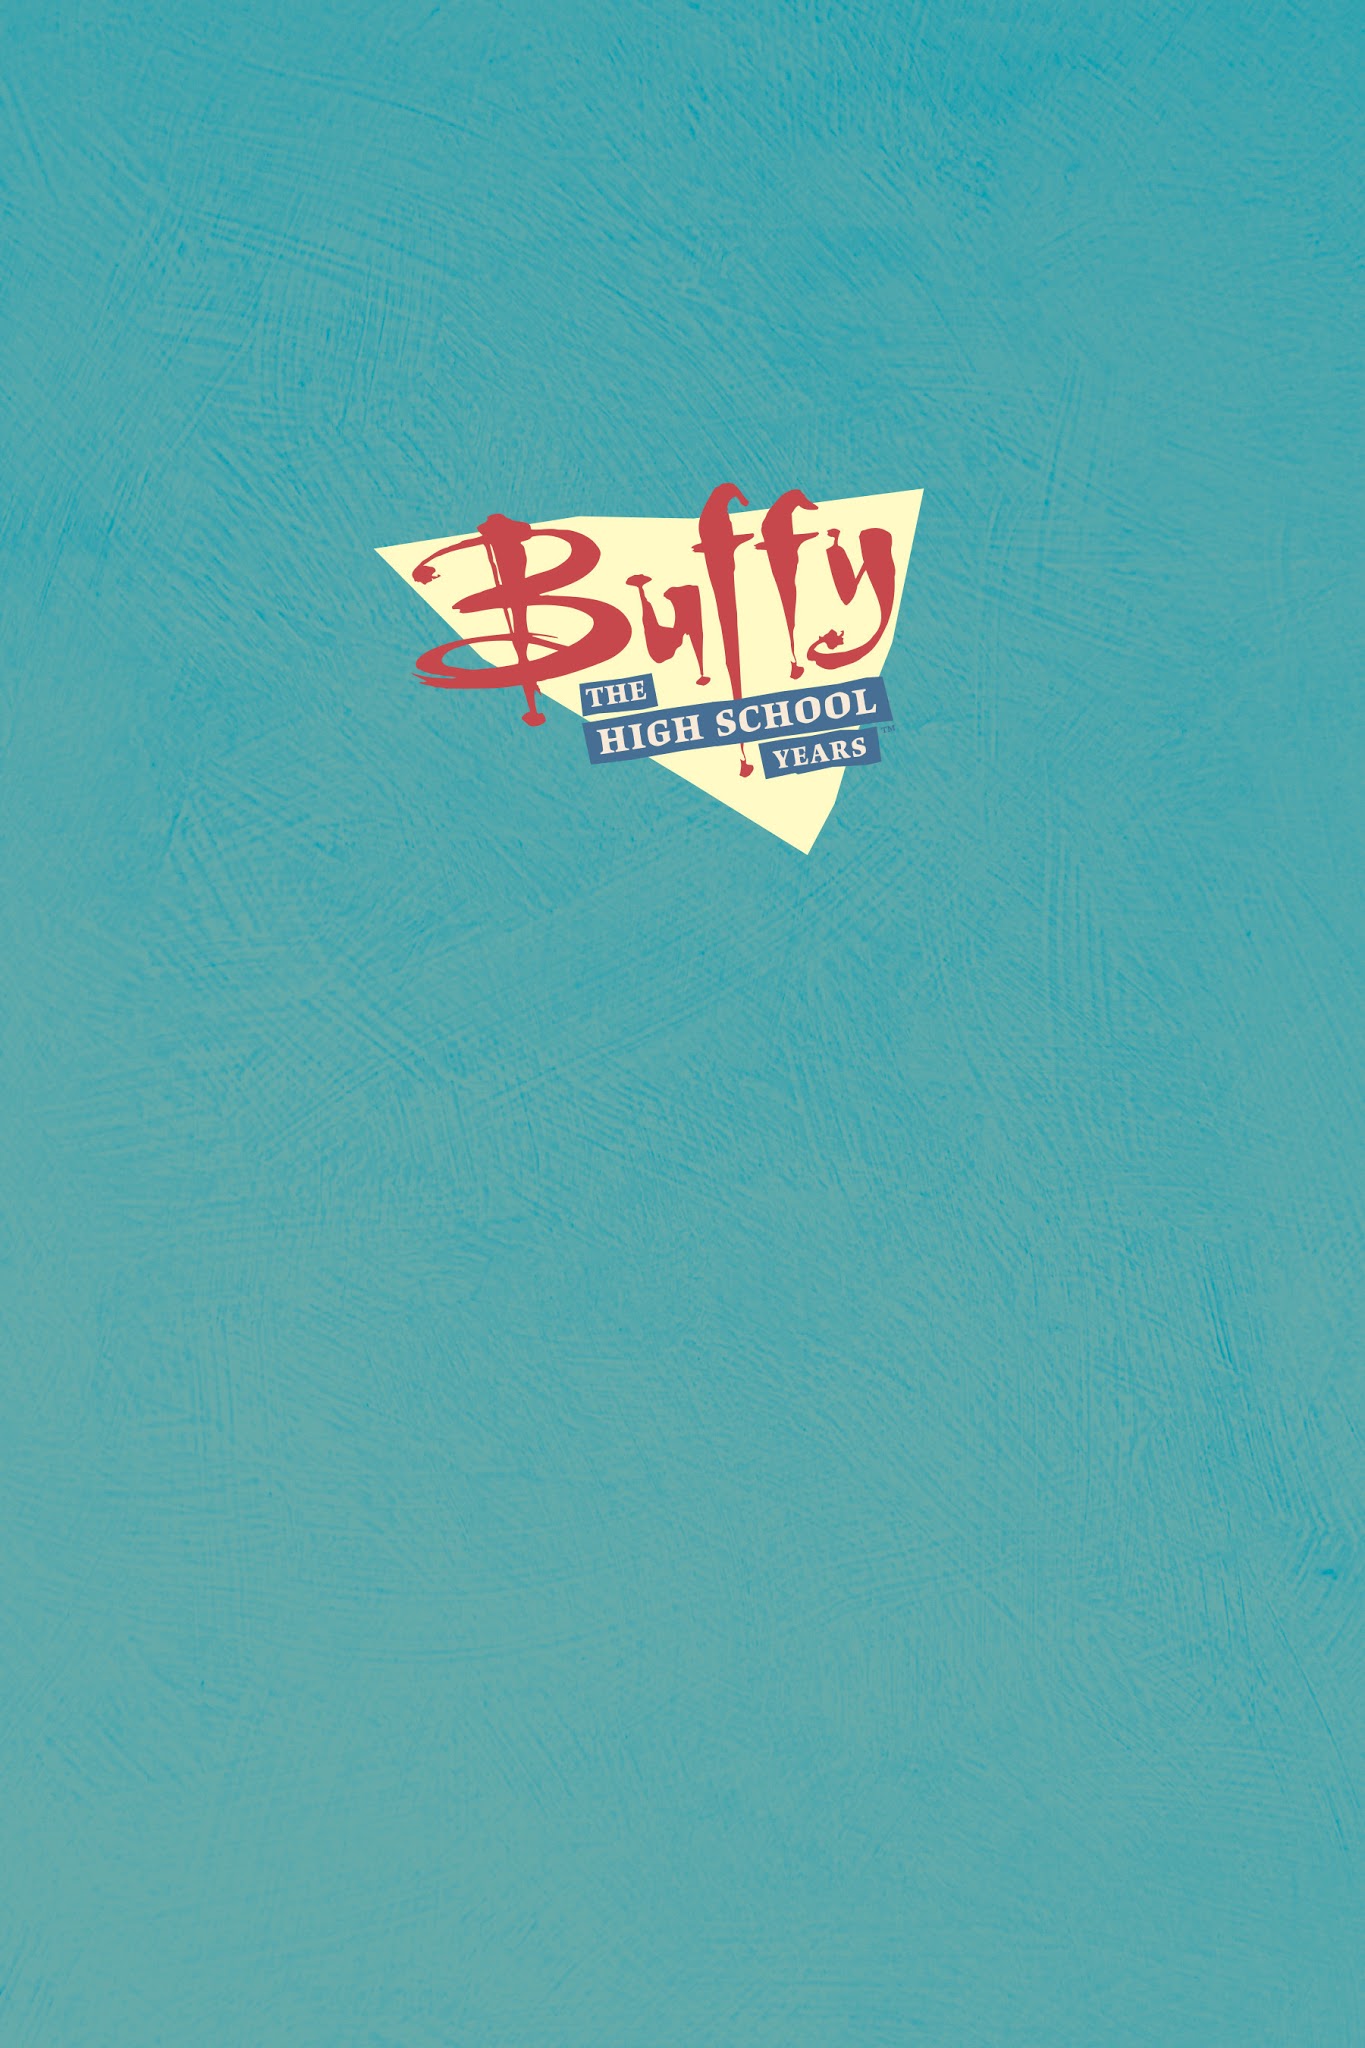 Read online Buffy: The High School Years comic -  Issue # TPB 2 - 3